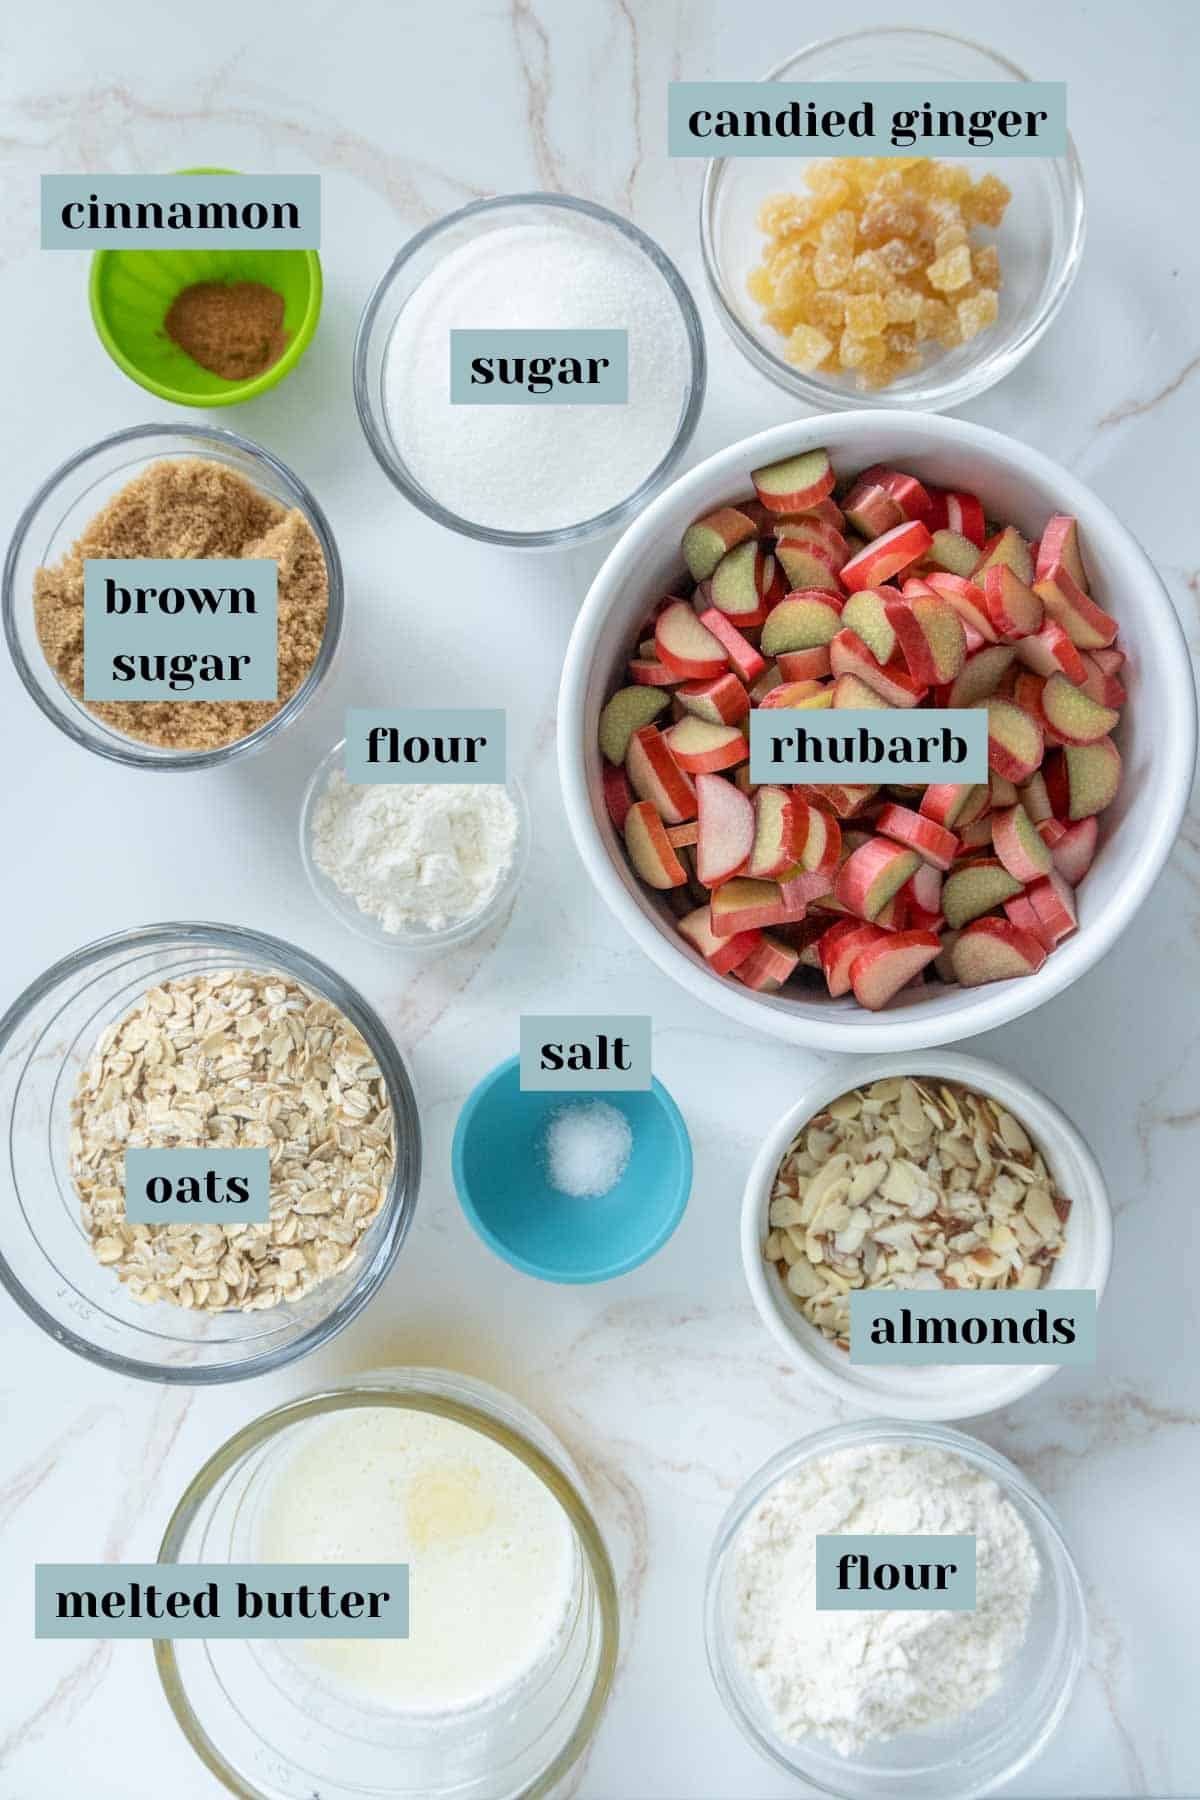 Various baking ingredients labeled in containers, including cinnamon, sugar, brown sugar, flour, oats, melted butter, salt, almonds, candied ginger, and chopped rhubarb.